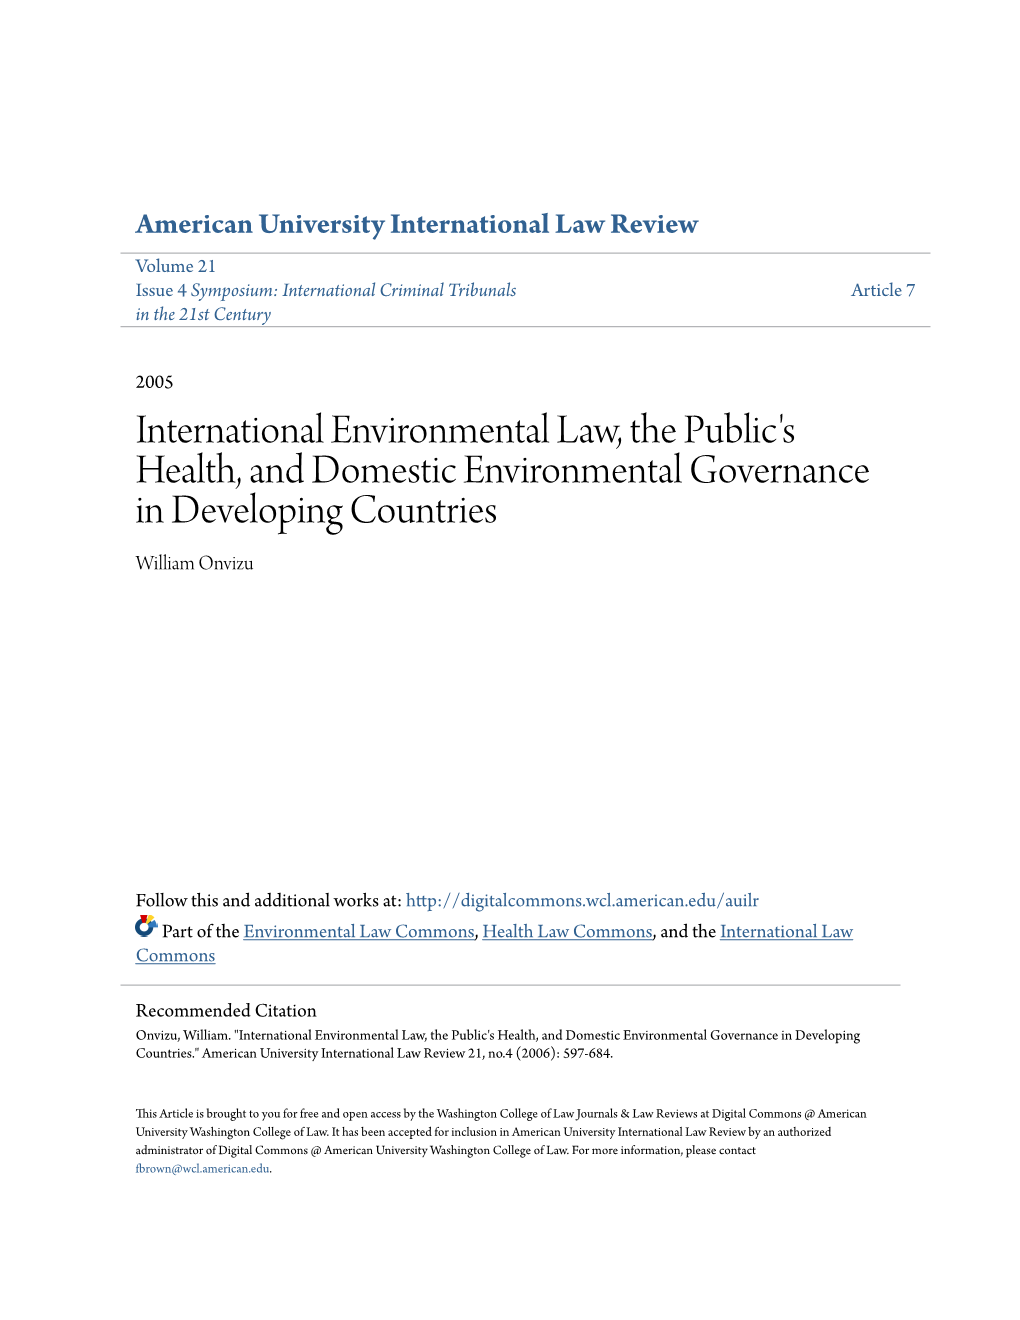 International Environmental Law, the Public's Health, and Domestic Environmental Governance in Developing Countries William Onvizu